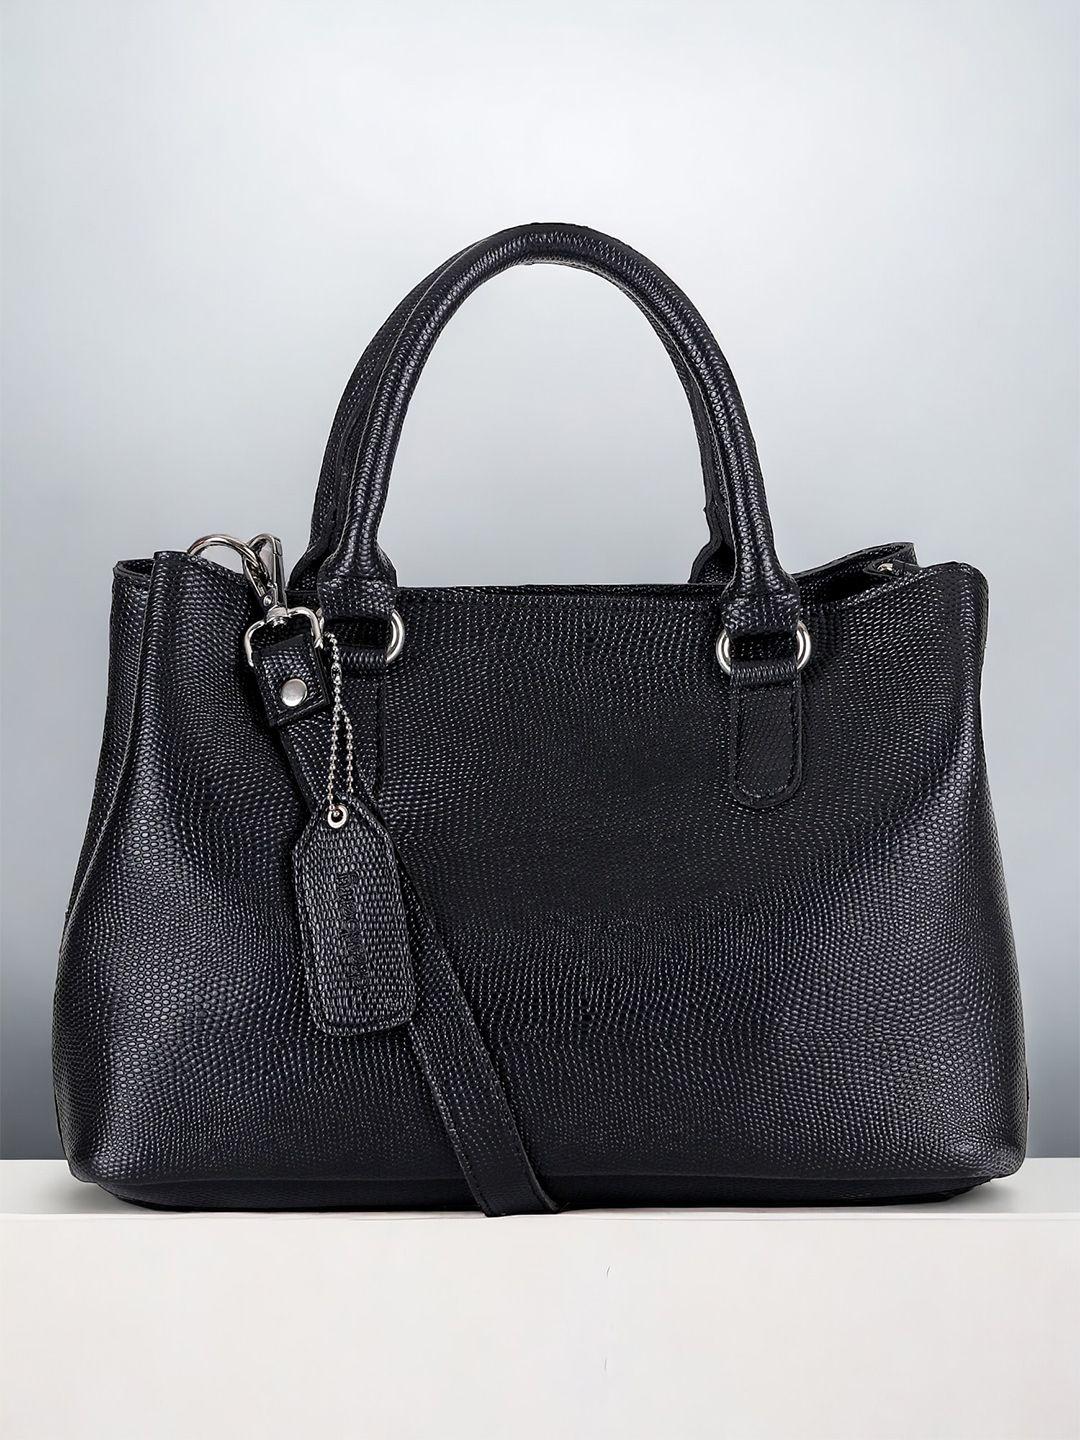 dressberry black textured oversized swagger handheld bag with tasselled